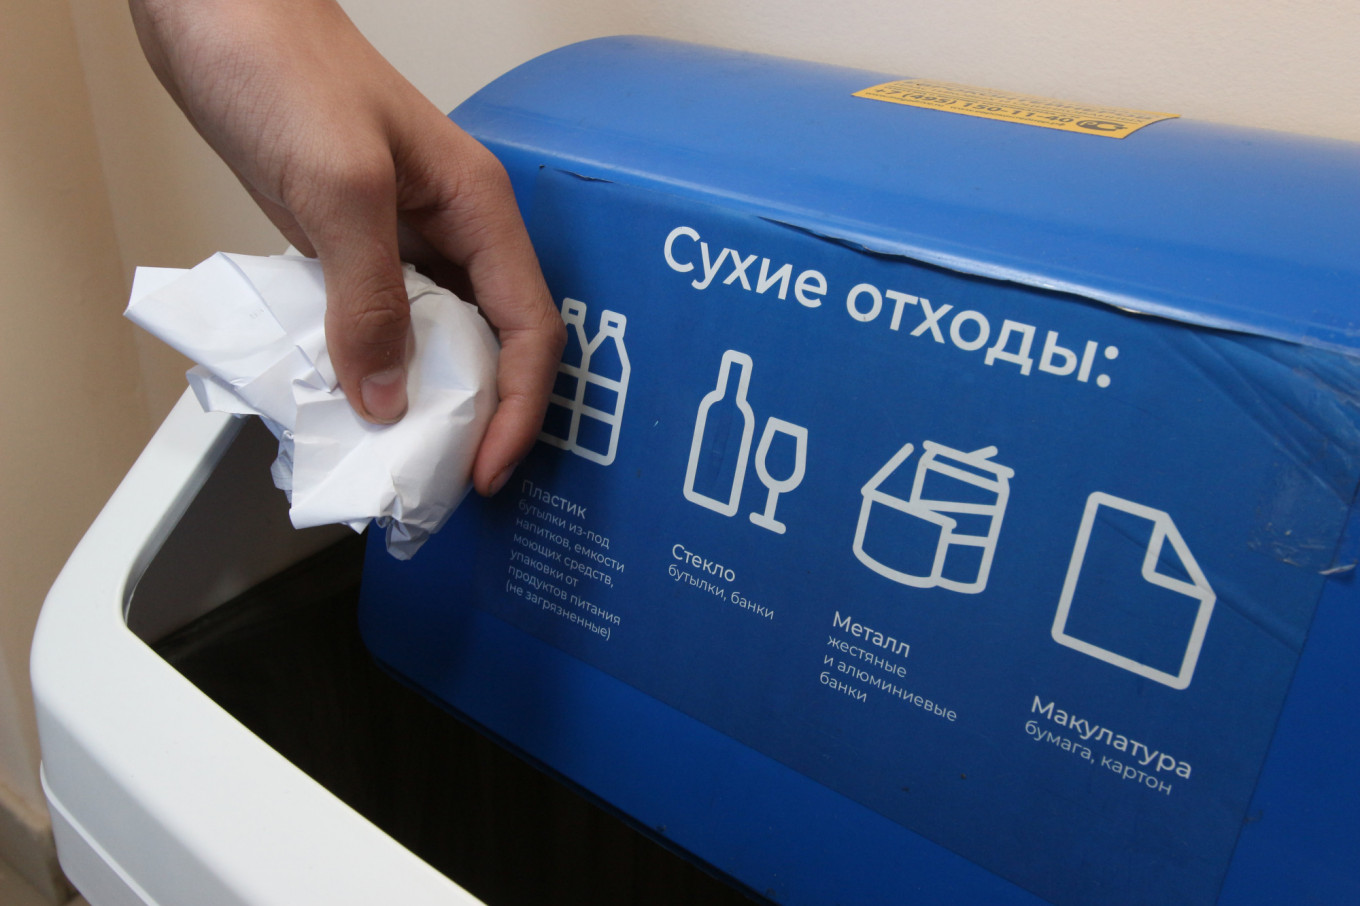 Moscow to Have Citywide Recycling Program By 2020 – Mayor’s Office